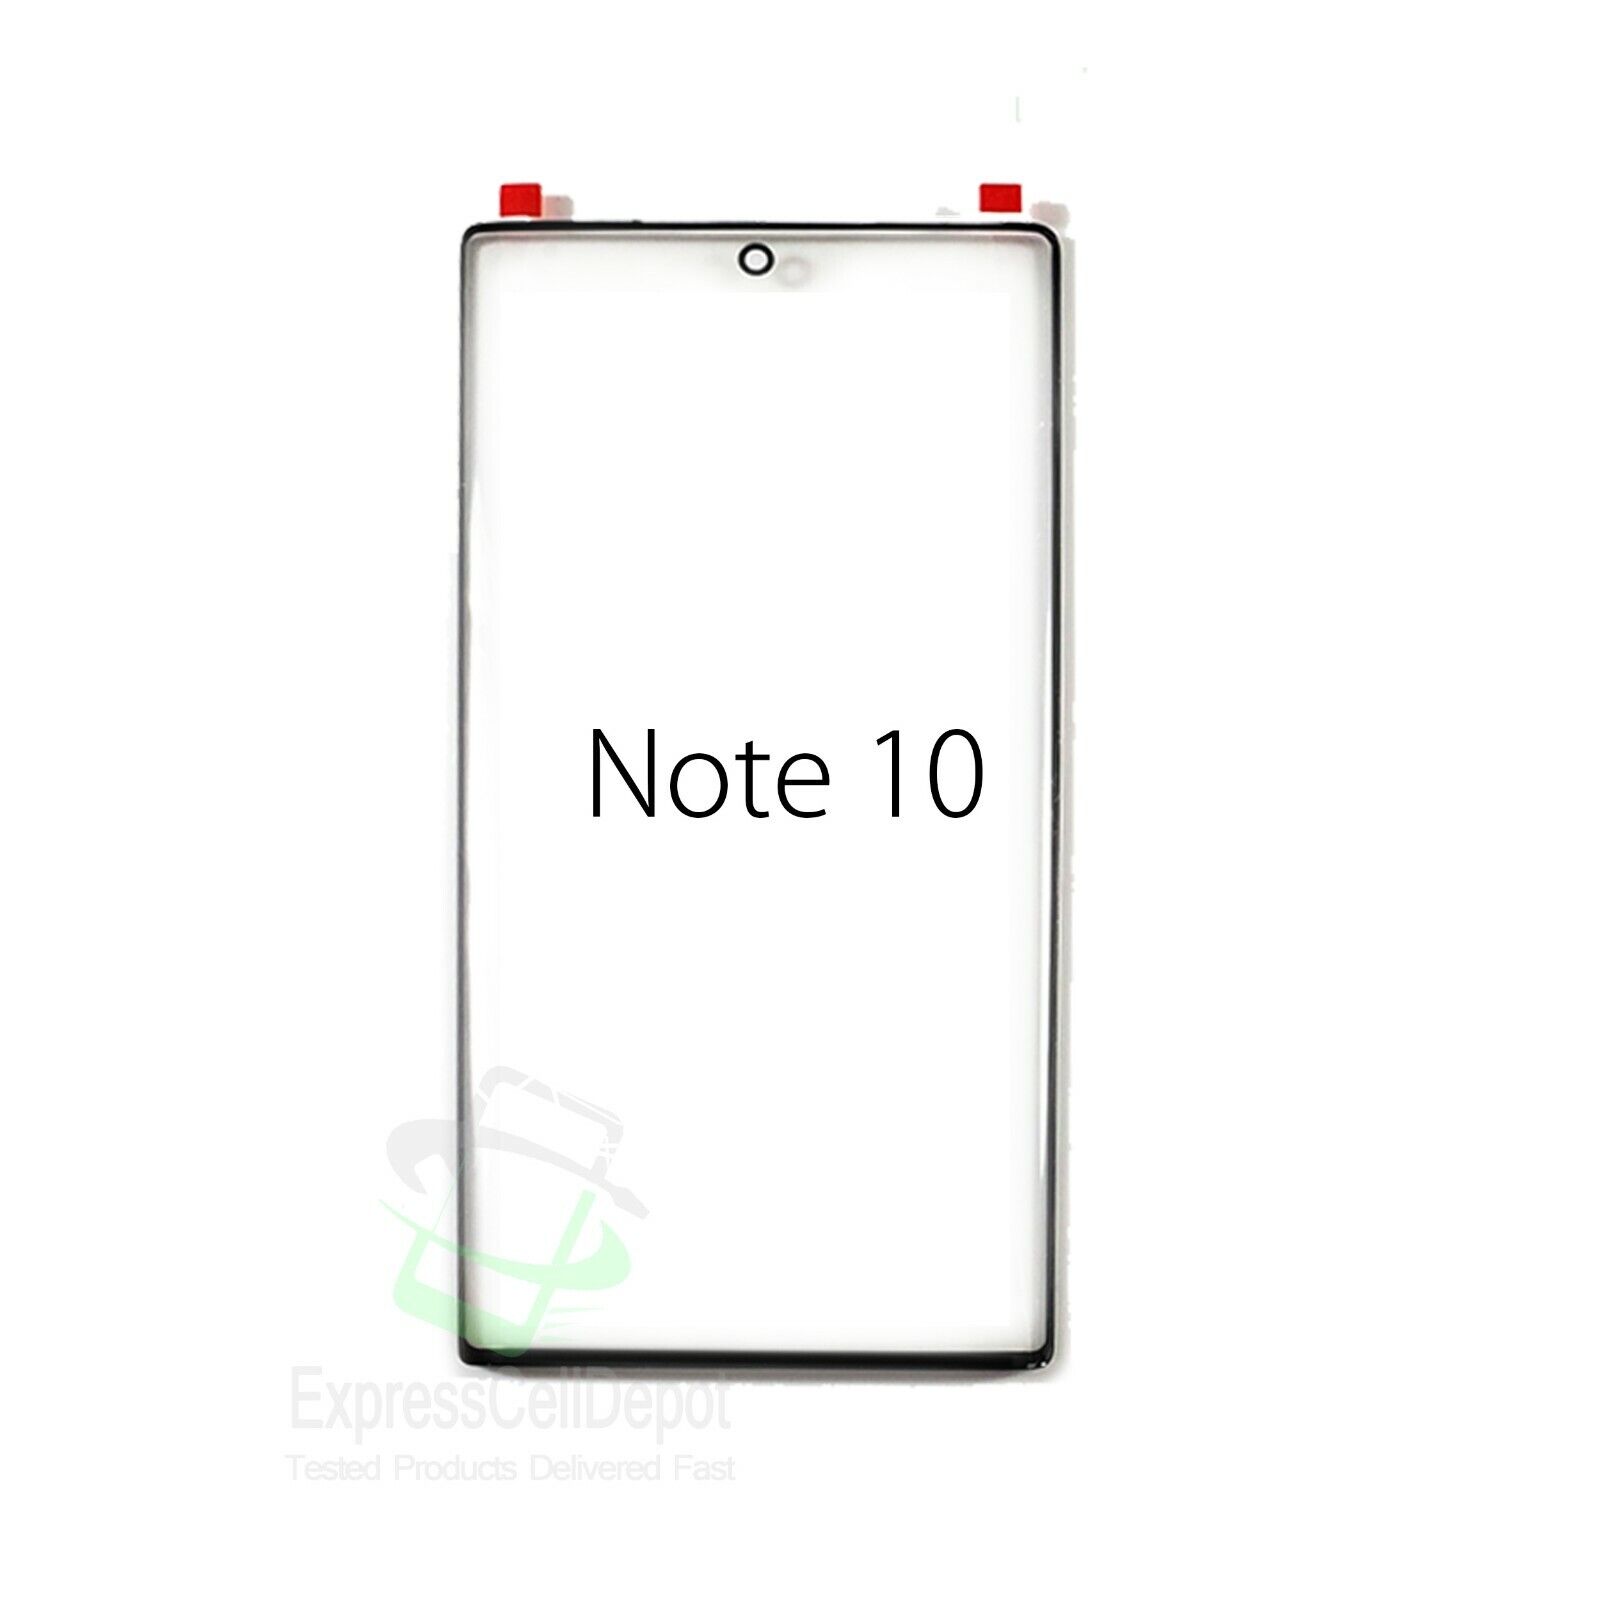 Samsung Galaxy Note 20/Ultra/10+/10/9/8 Replacement Screen Front Outer Glass Unbranded/Generic Does Not Apply - фотография #11